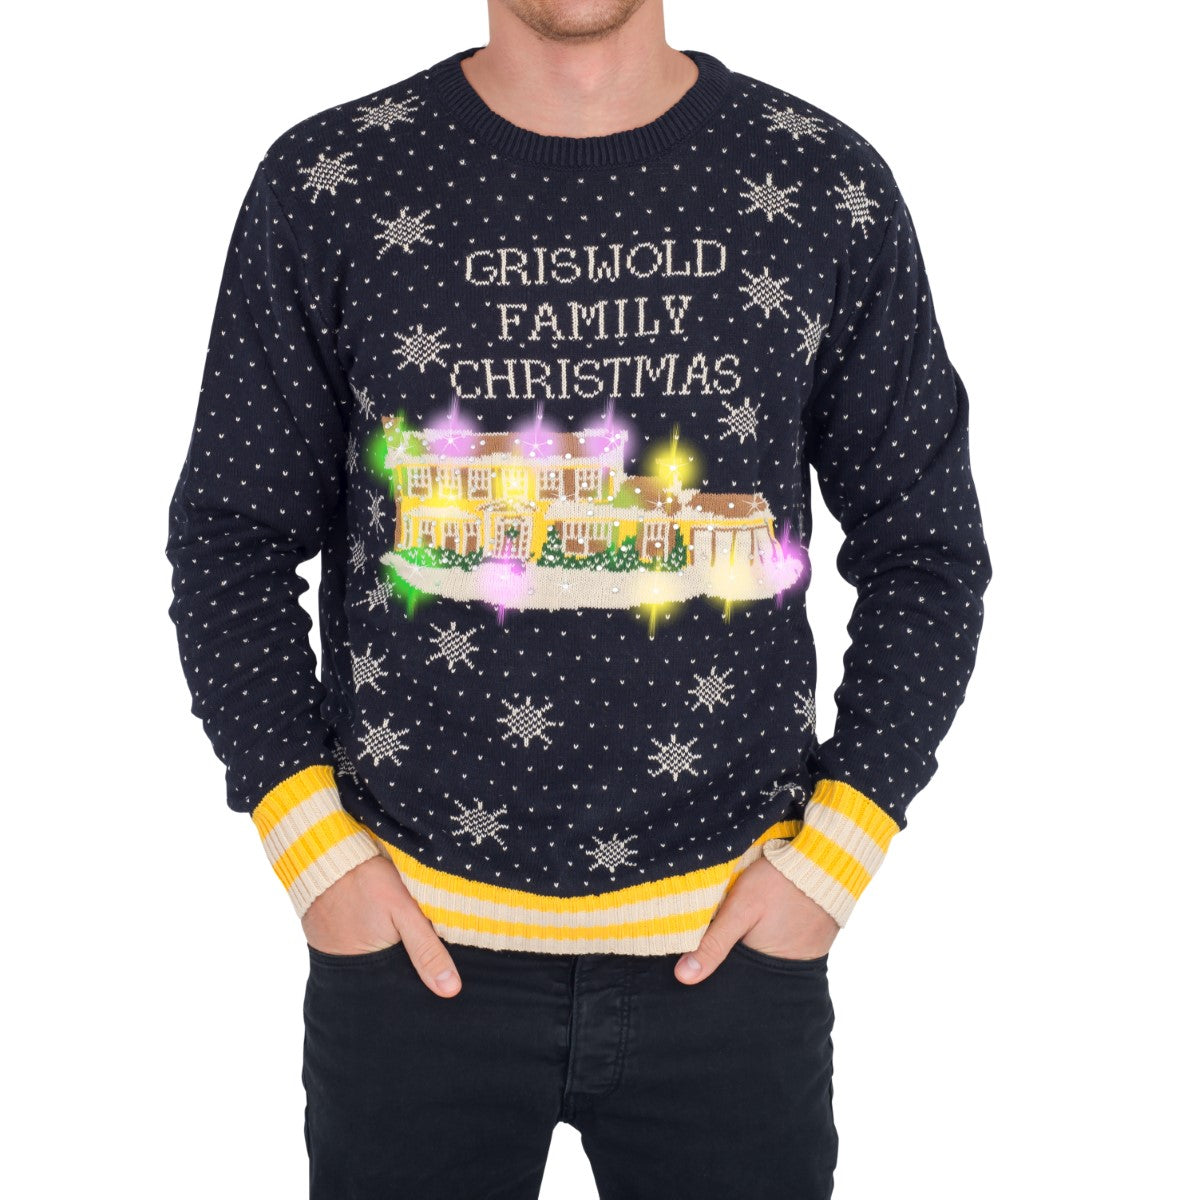 Griswold Family Christmas Ugly Christmas Sweater – LED Lights 1